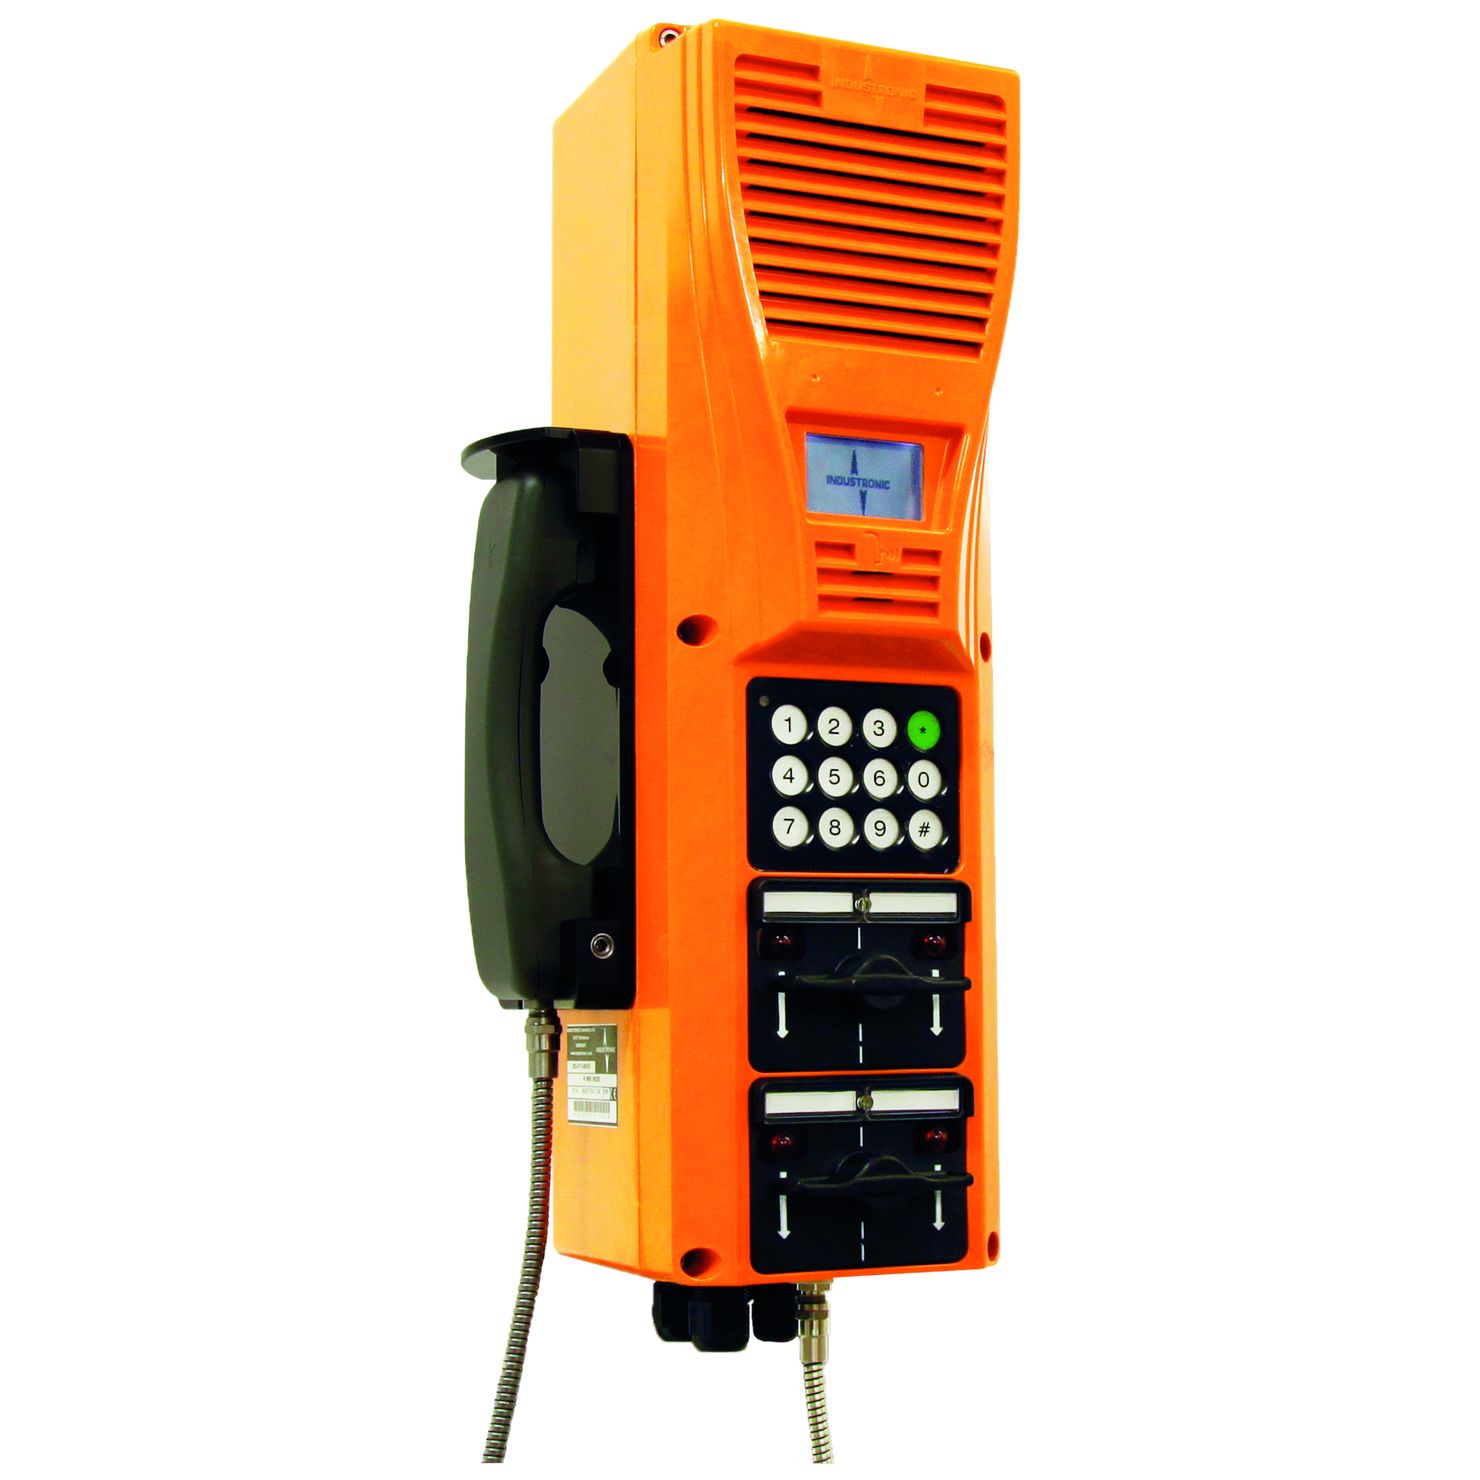 The weather-proof IP outdoor (harsh environment) intercom stations of the NRO xx2/D series with integrated dial keypad are part of the INTRON-D plus communication and public address system from INDUSTRONIC.